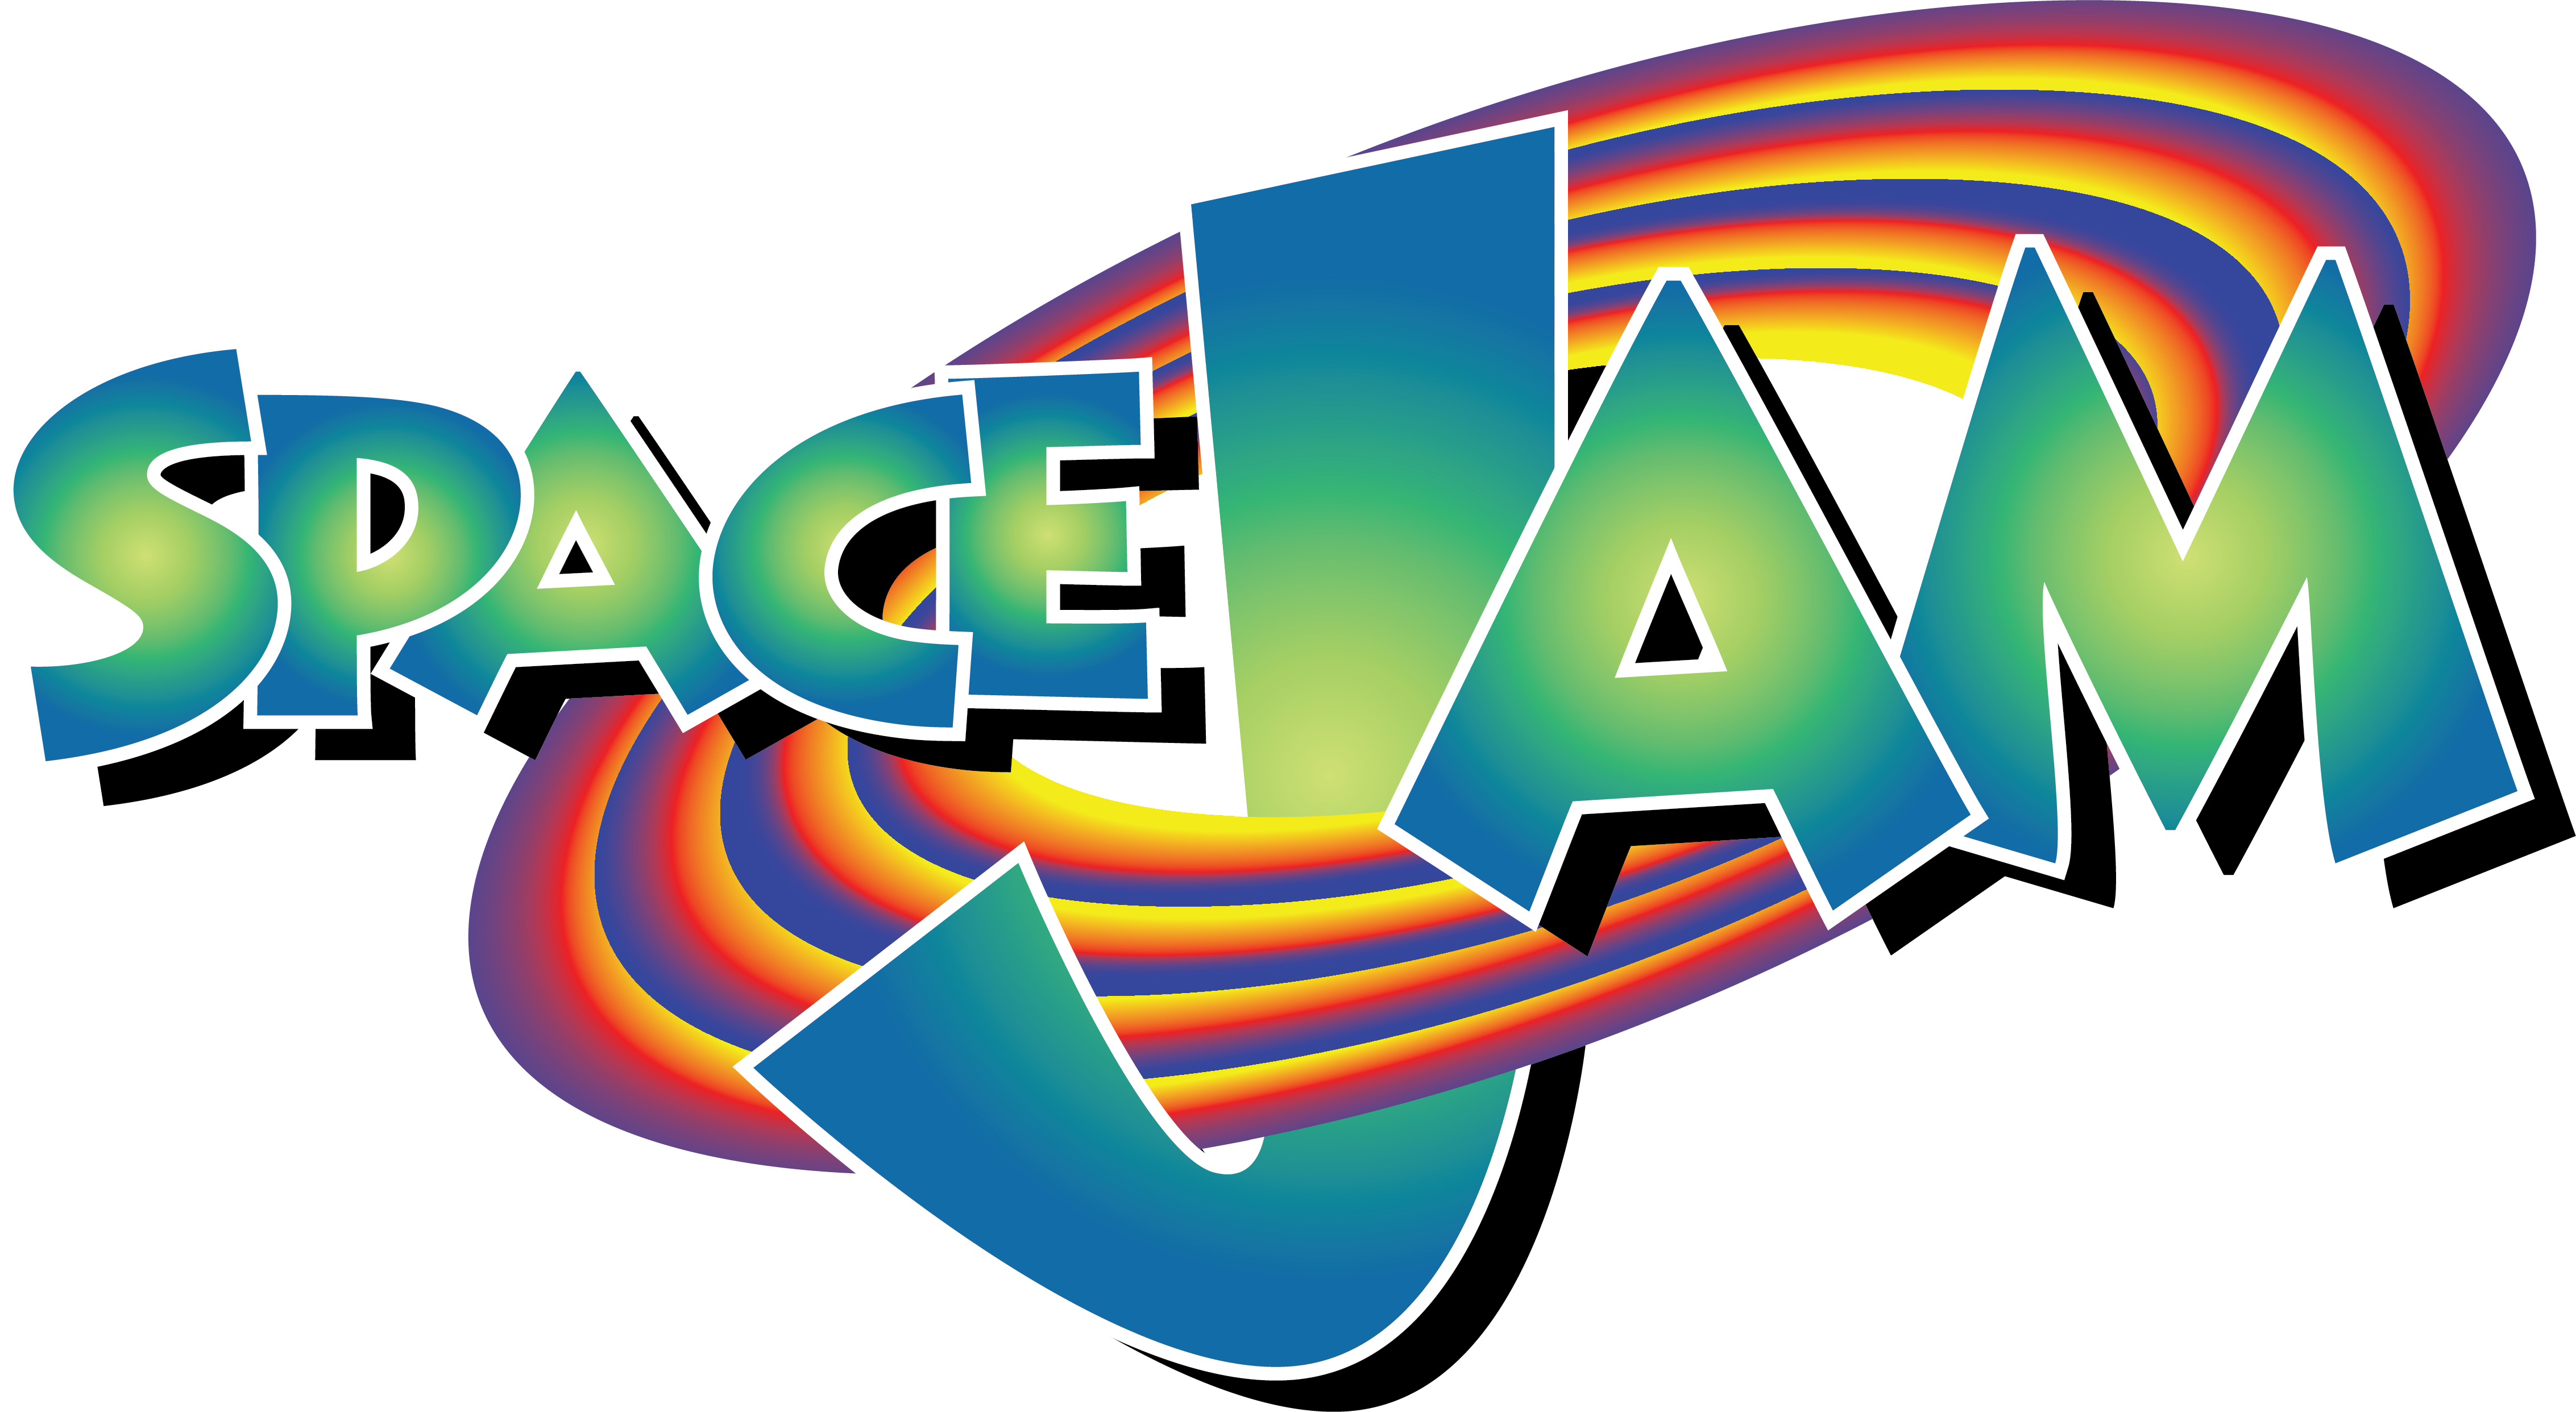 Download Space Jam - Space Jam Logo Png Clipart Png Download - PikPng